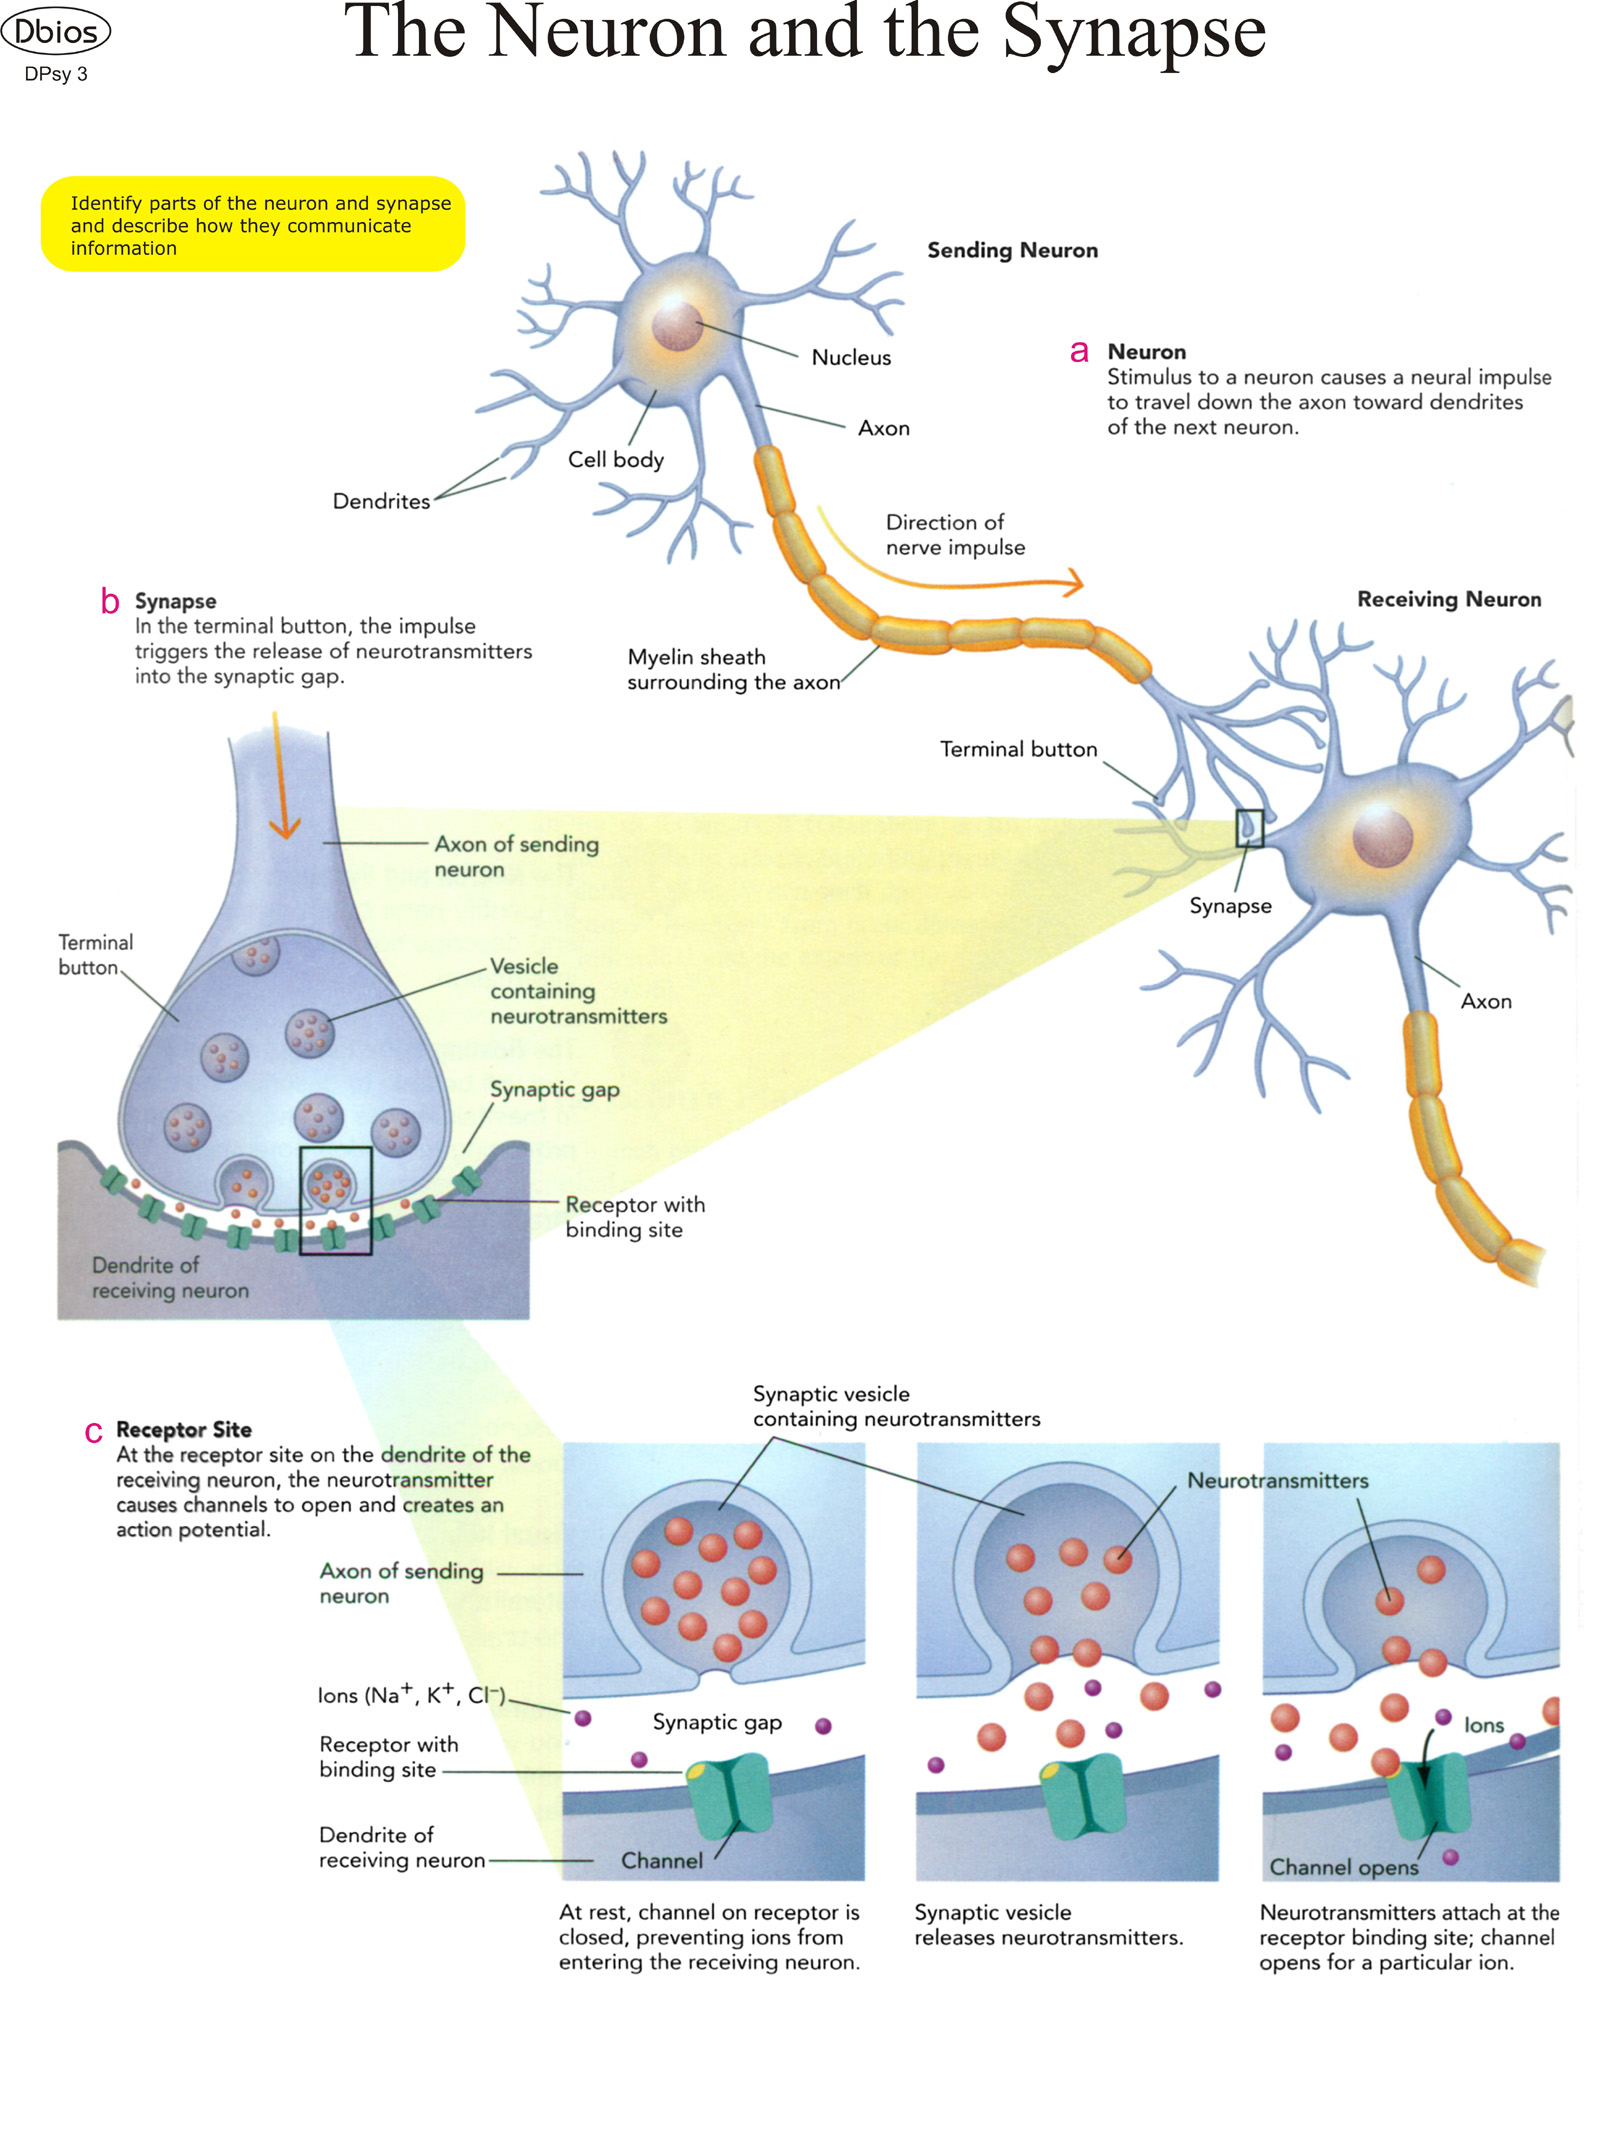 dpsy-3-the-neuron-and-the-synapse-dbios-charts